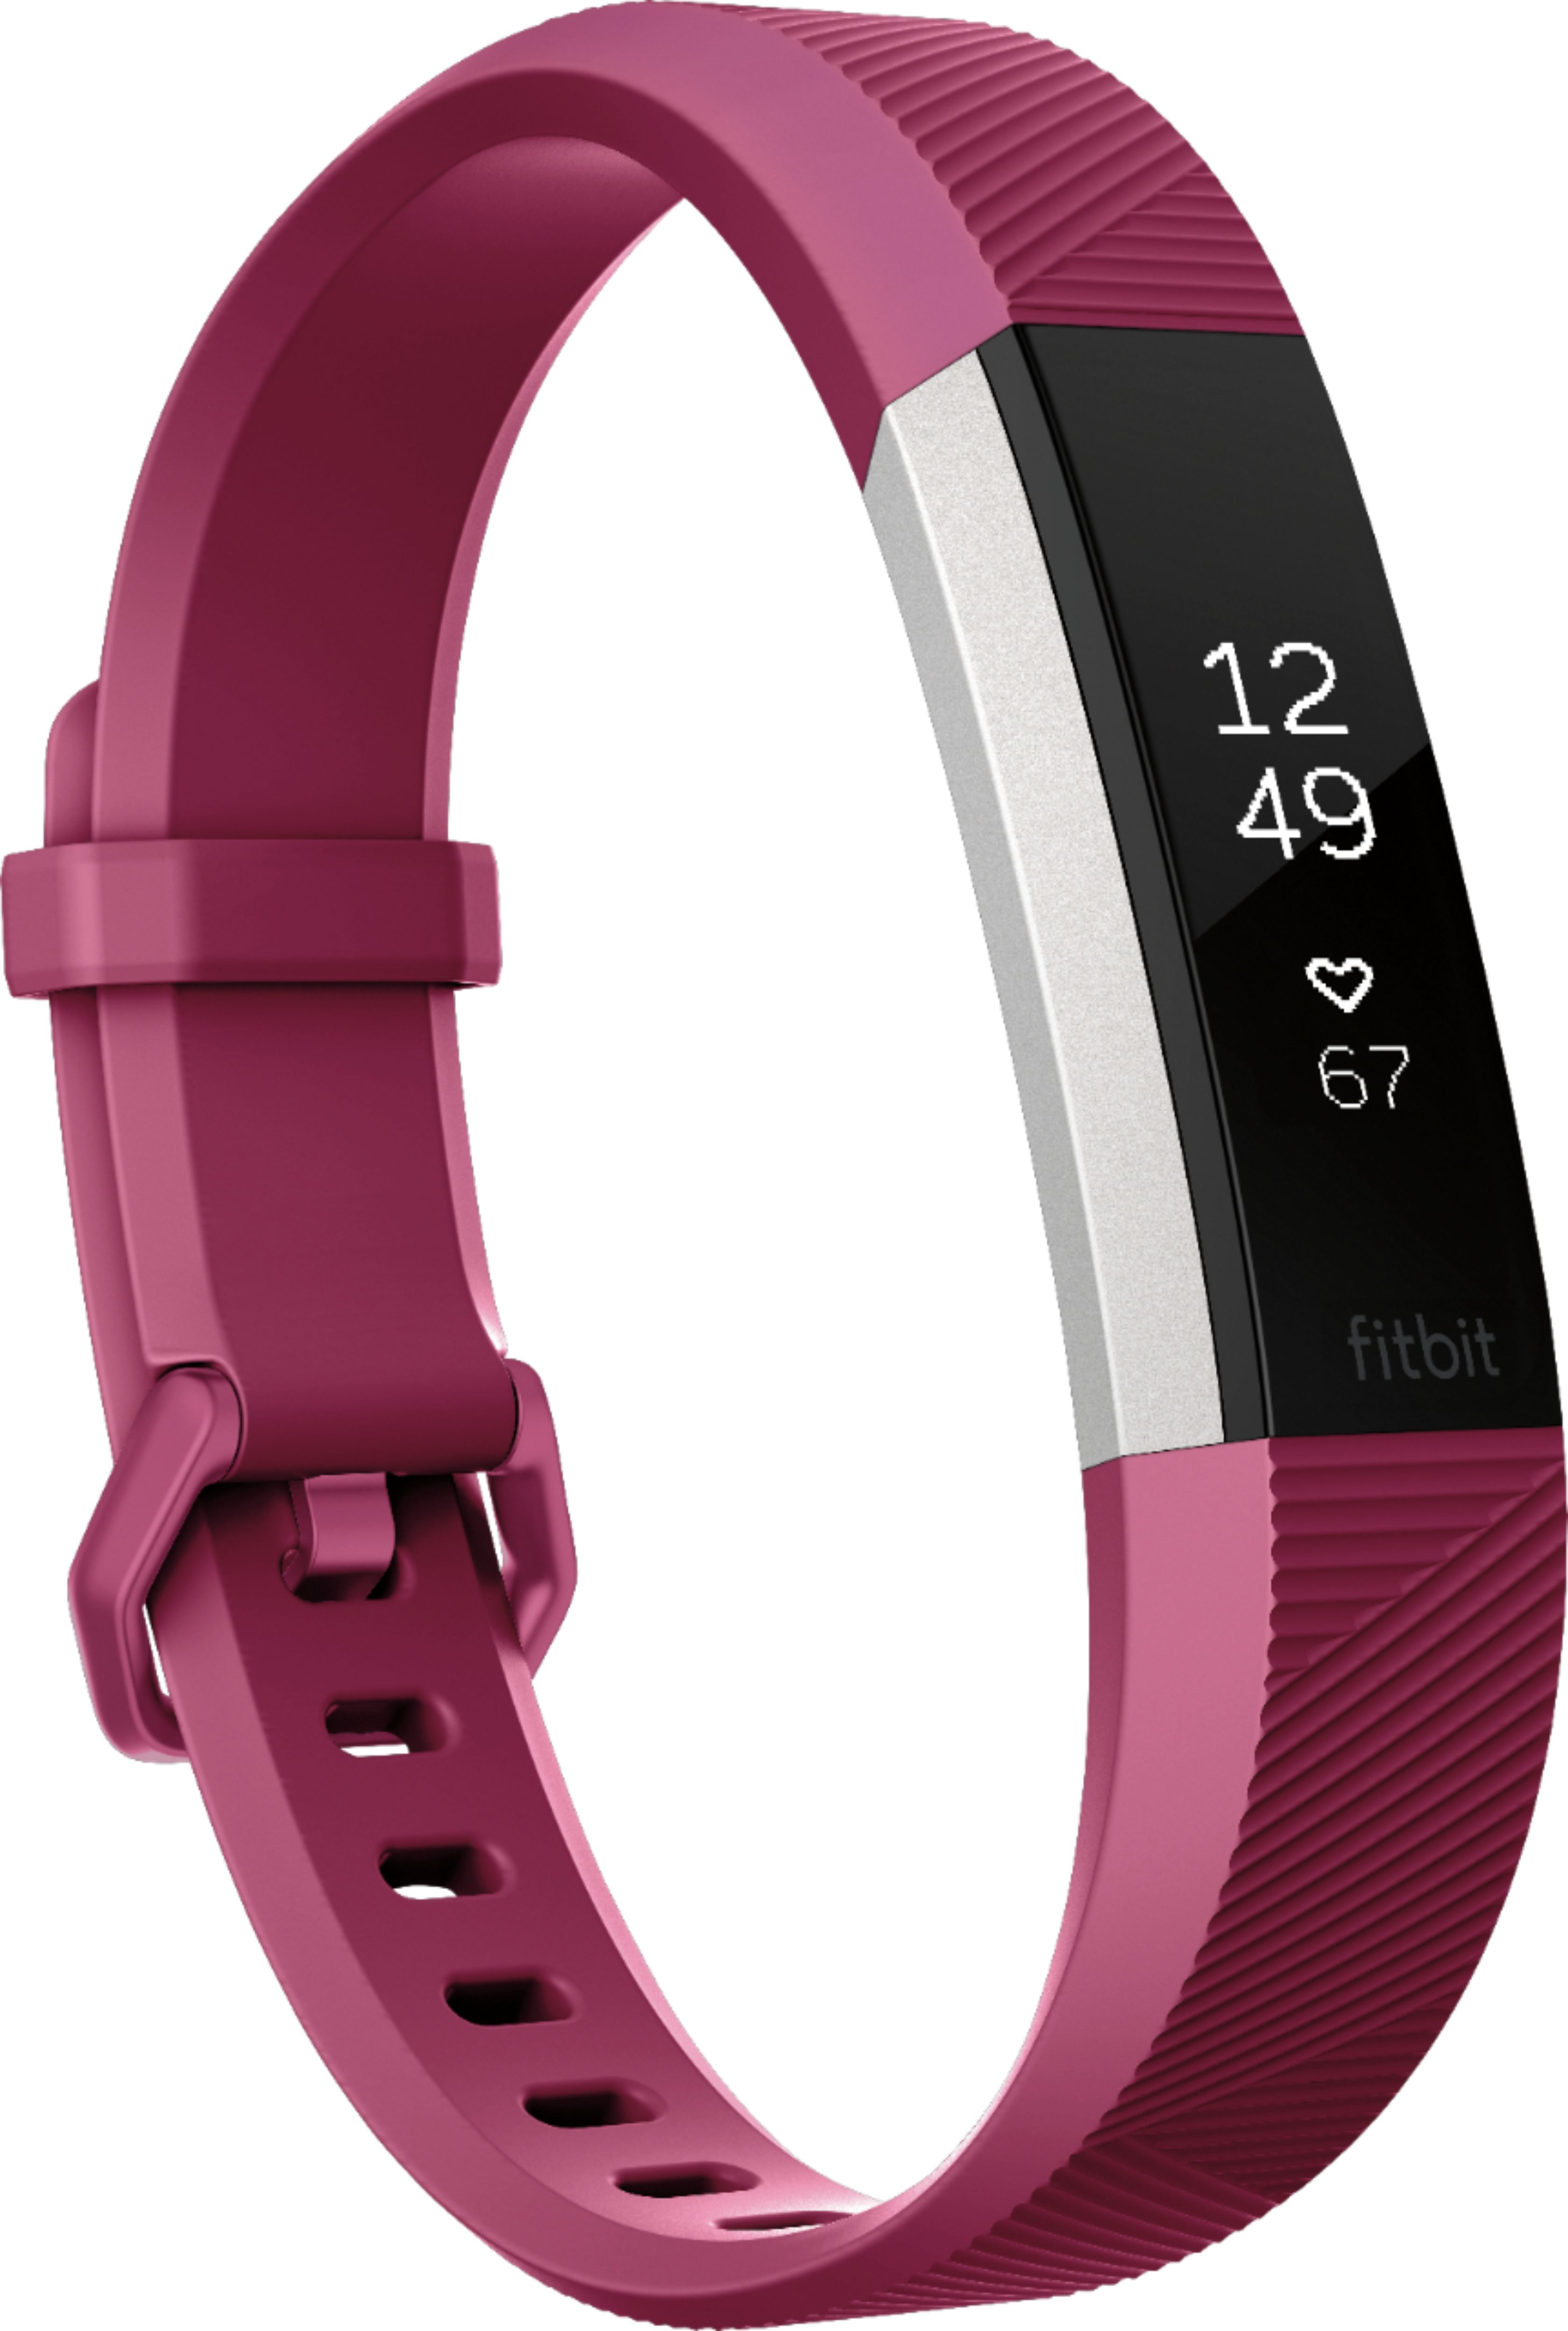 Customer Reviews: Fitbit Alta HR Activity Tracker + Heart Rate (Small ...